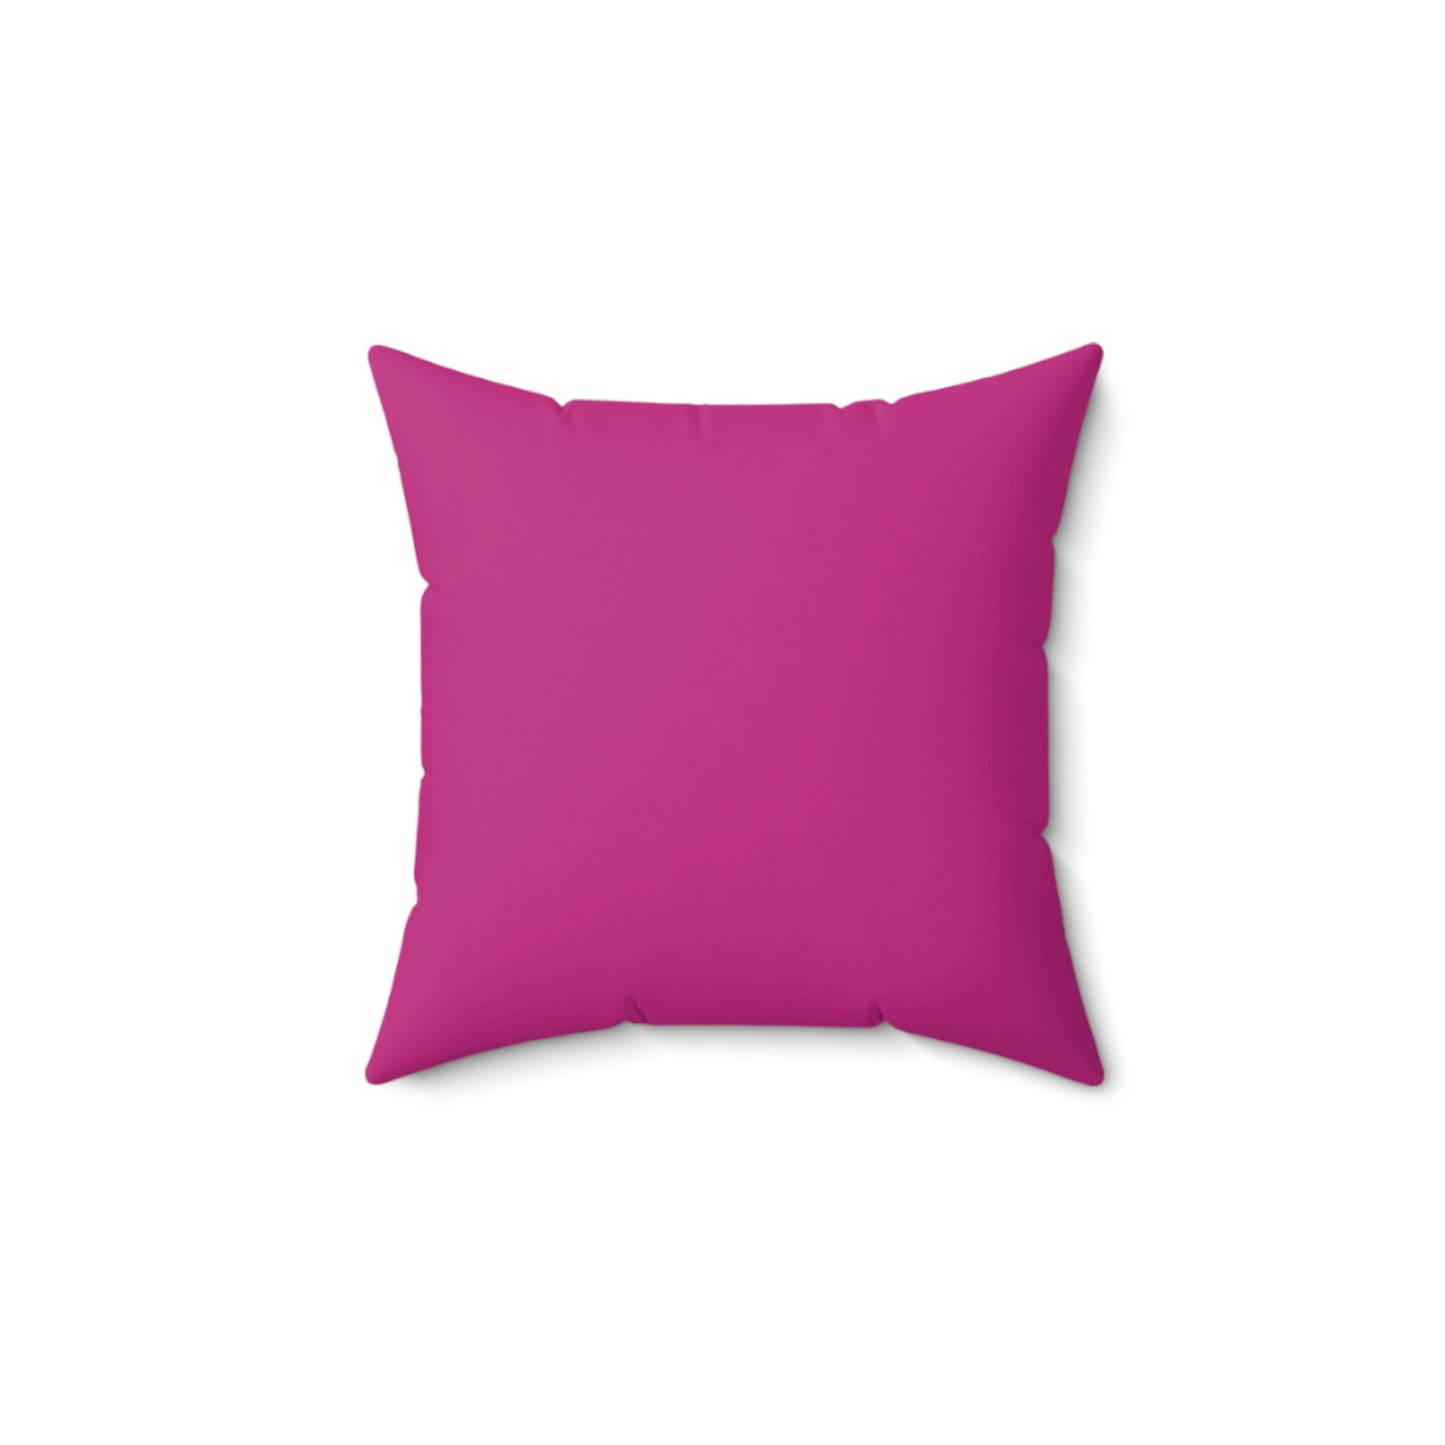 Spun Polyester Square Pillow Case "Cassettes on Pink”